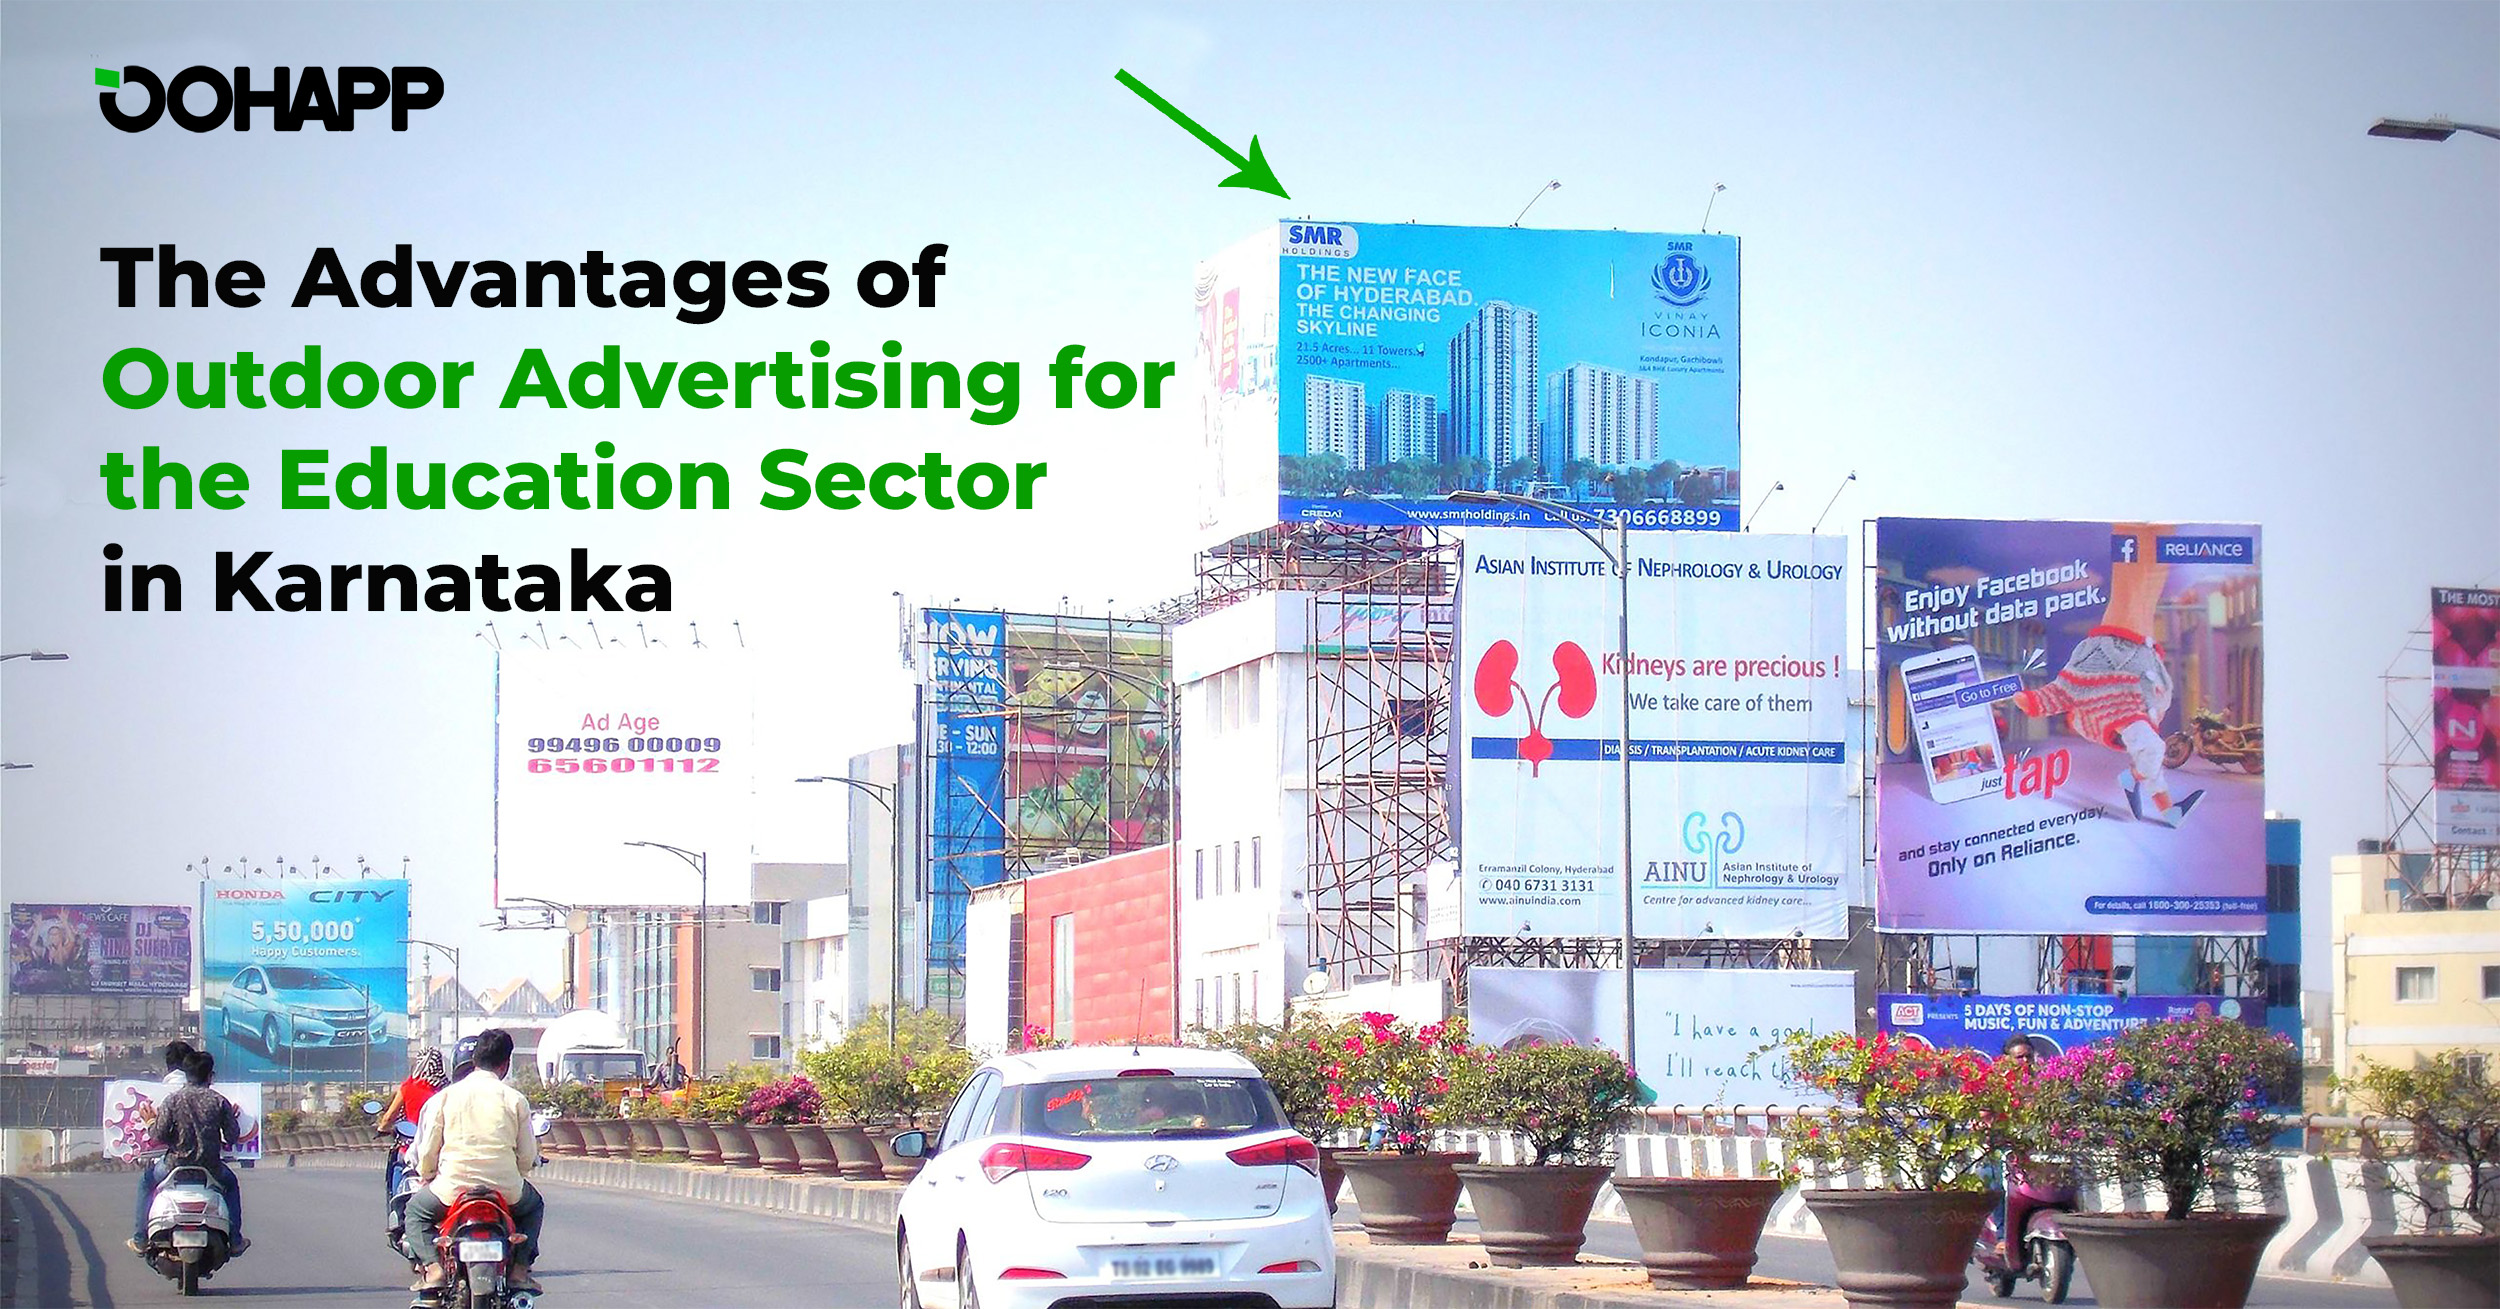 The Advantages of Outdoor Advertising for the Education Sector in Karnataka